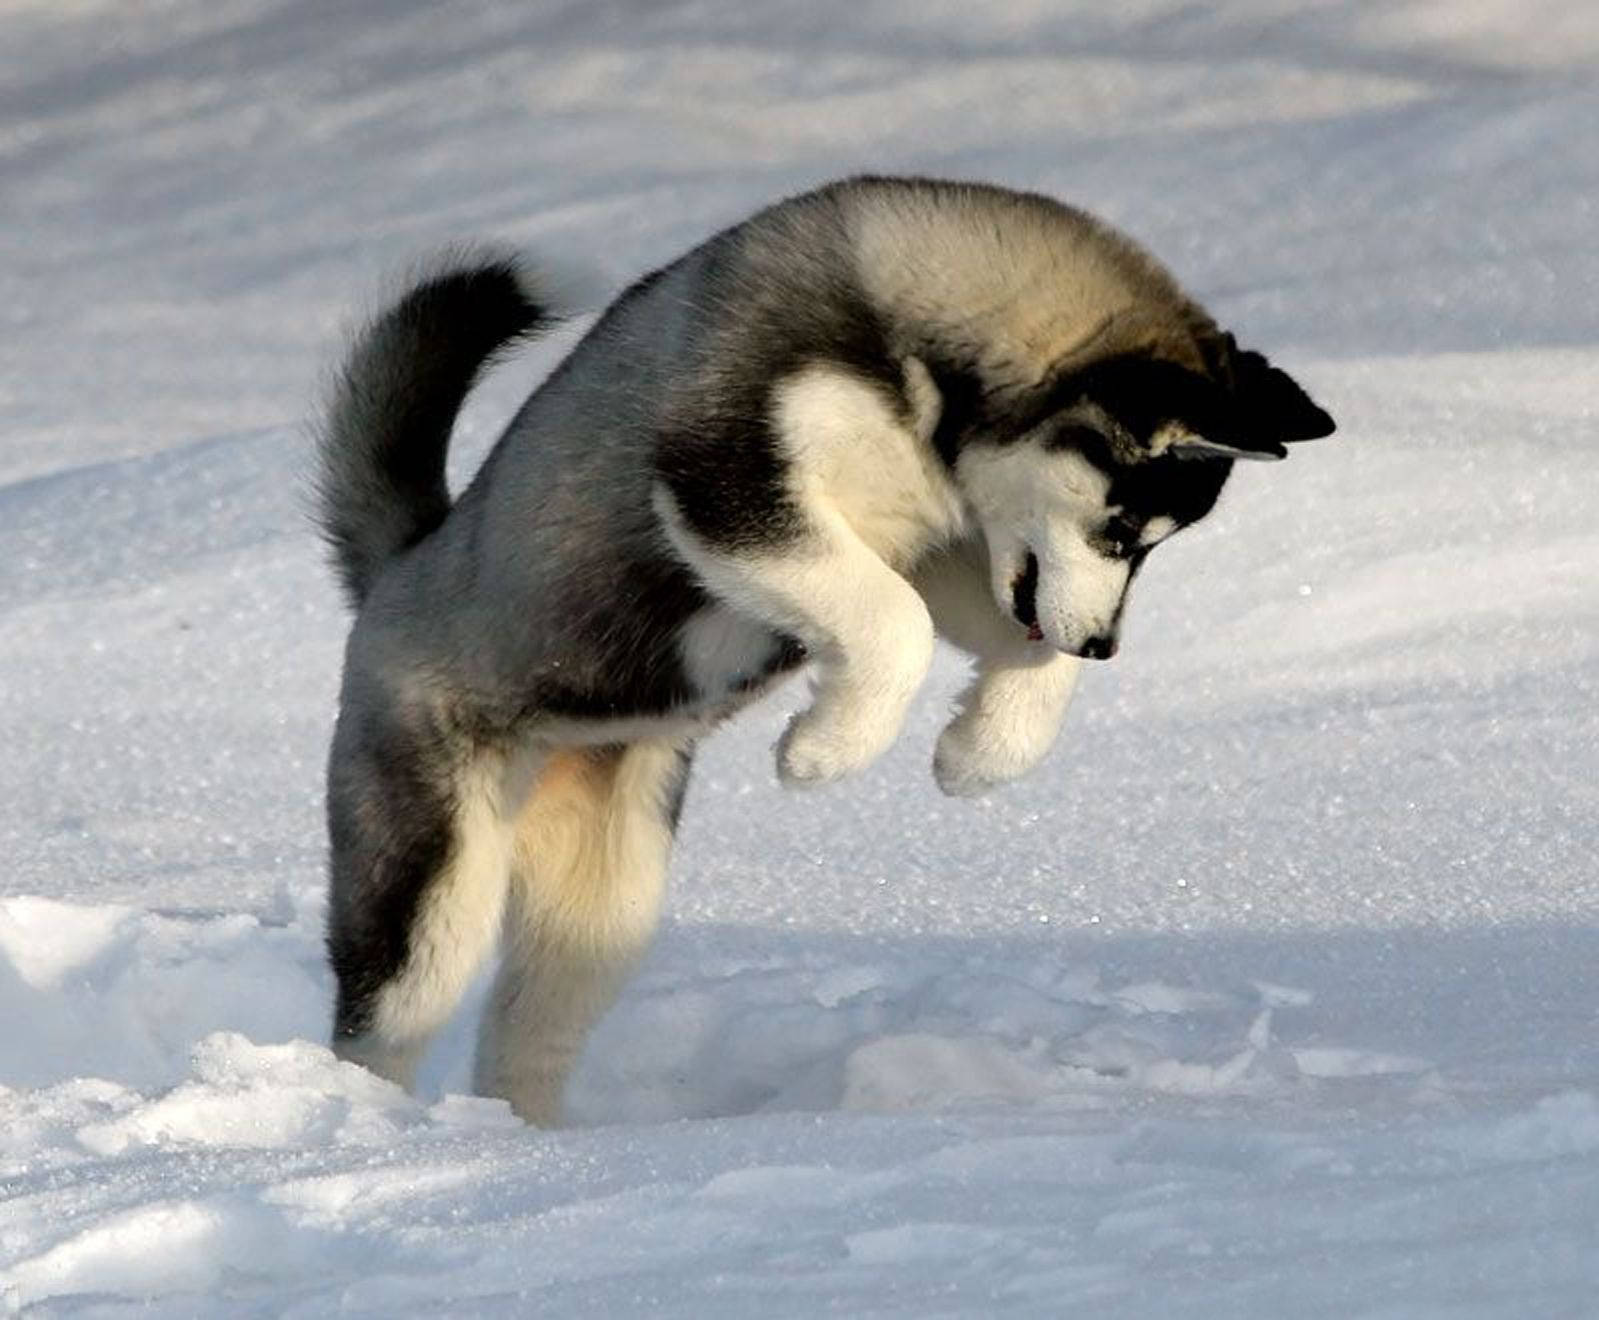 Husky Puppy Playing In Snow Wallpaper